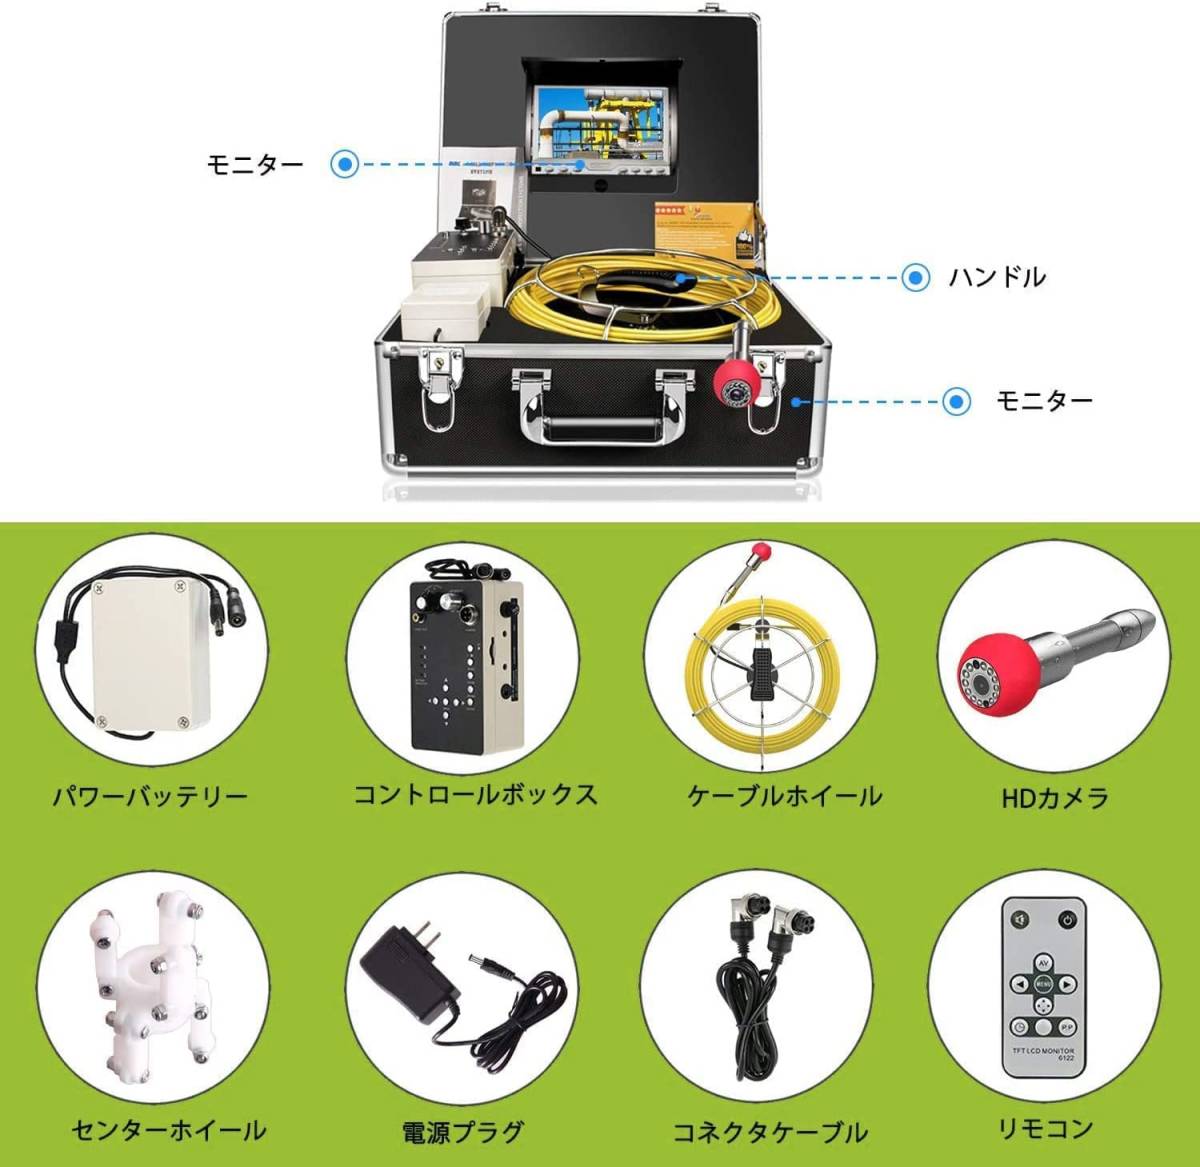 PRANITE piping camera inspection camera SD card type endoscope industry endoscope built-in 8G memory card 1000TVL CCD DVR recorder attaching 30M cable 